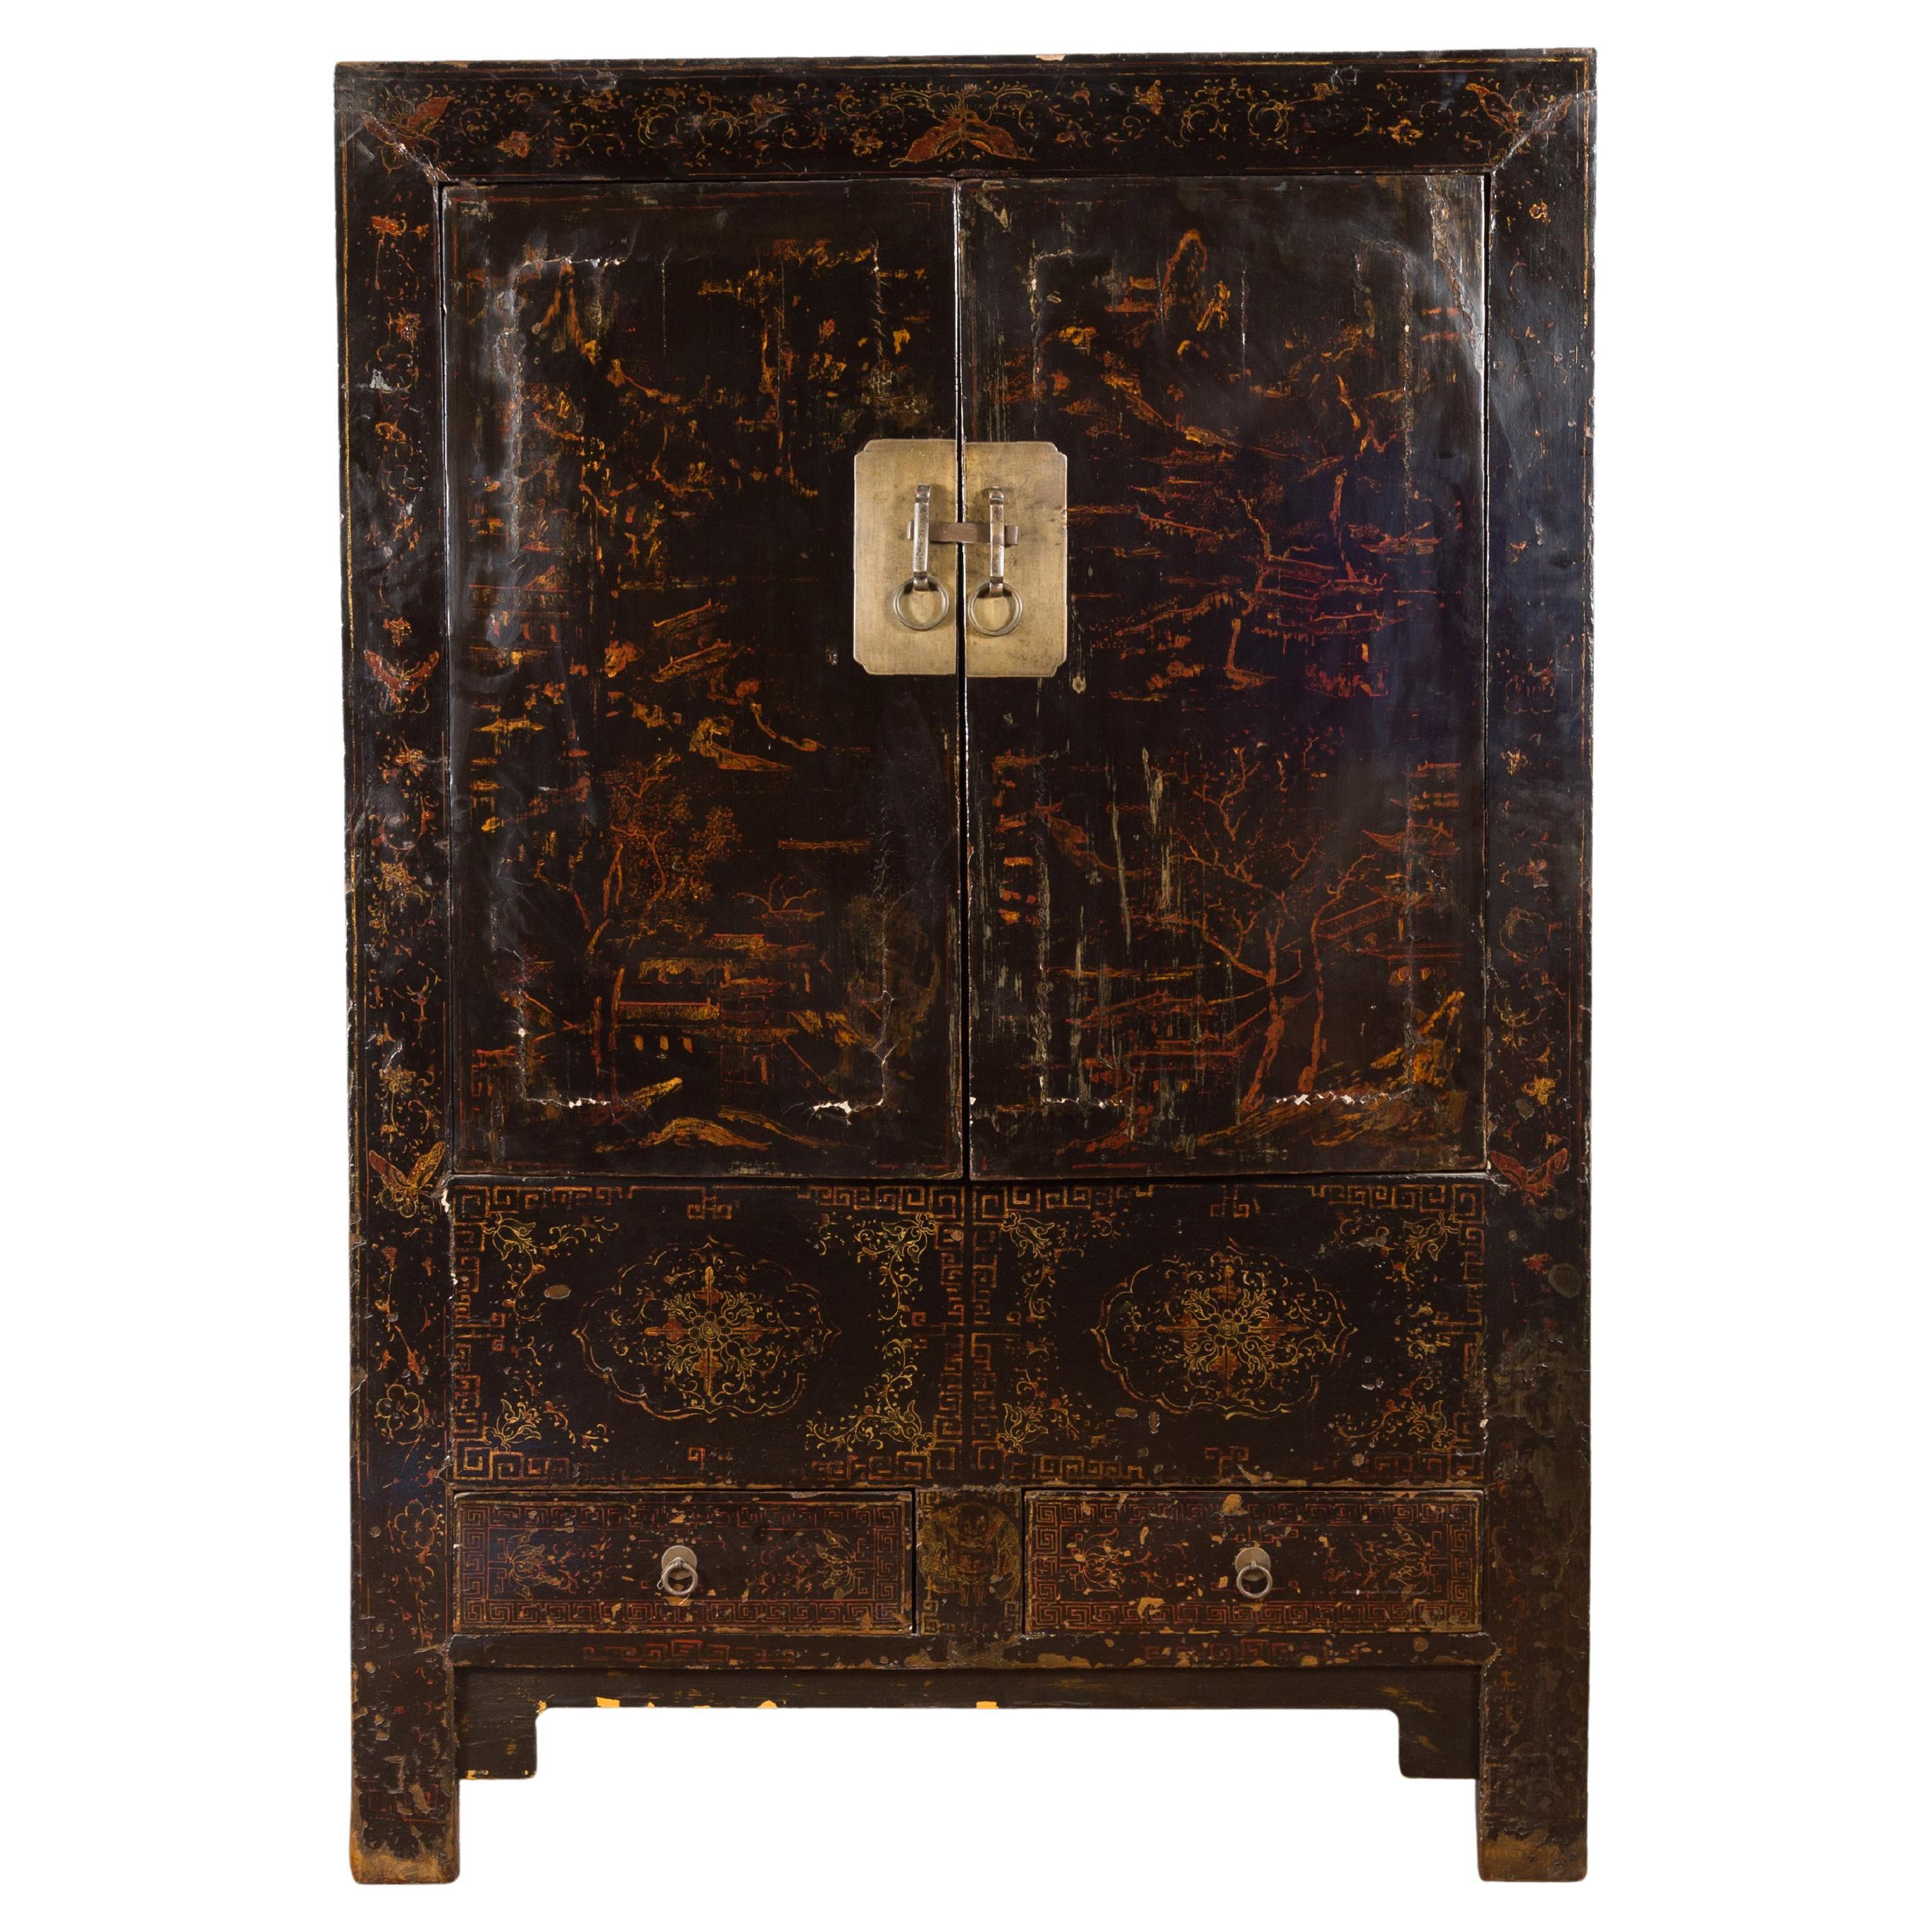 Chinese Qing Dynasty 19th Century Cabinet with Original Black Lacquer Finish For Sale